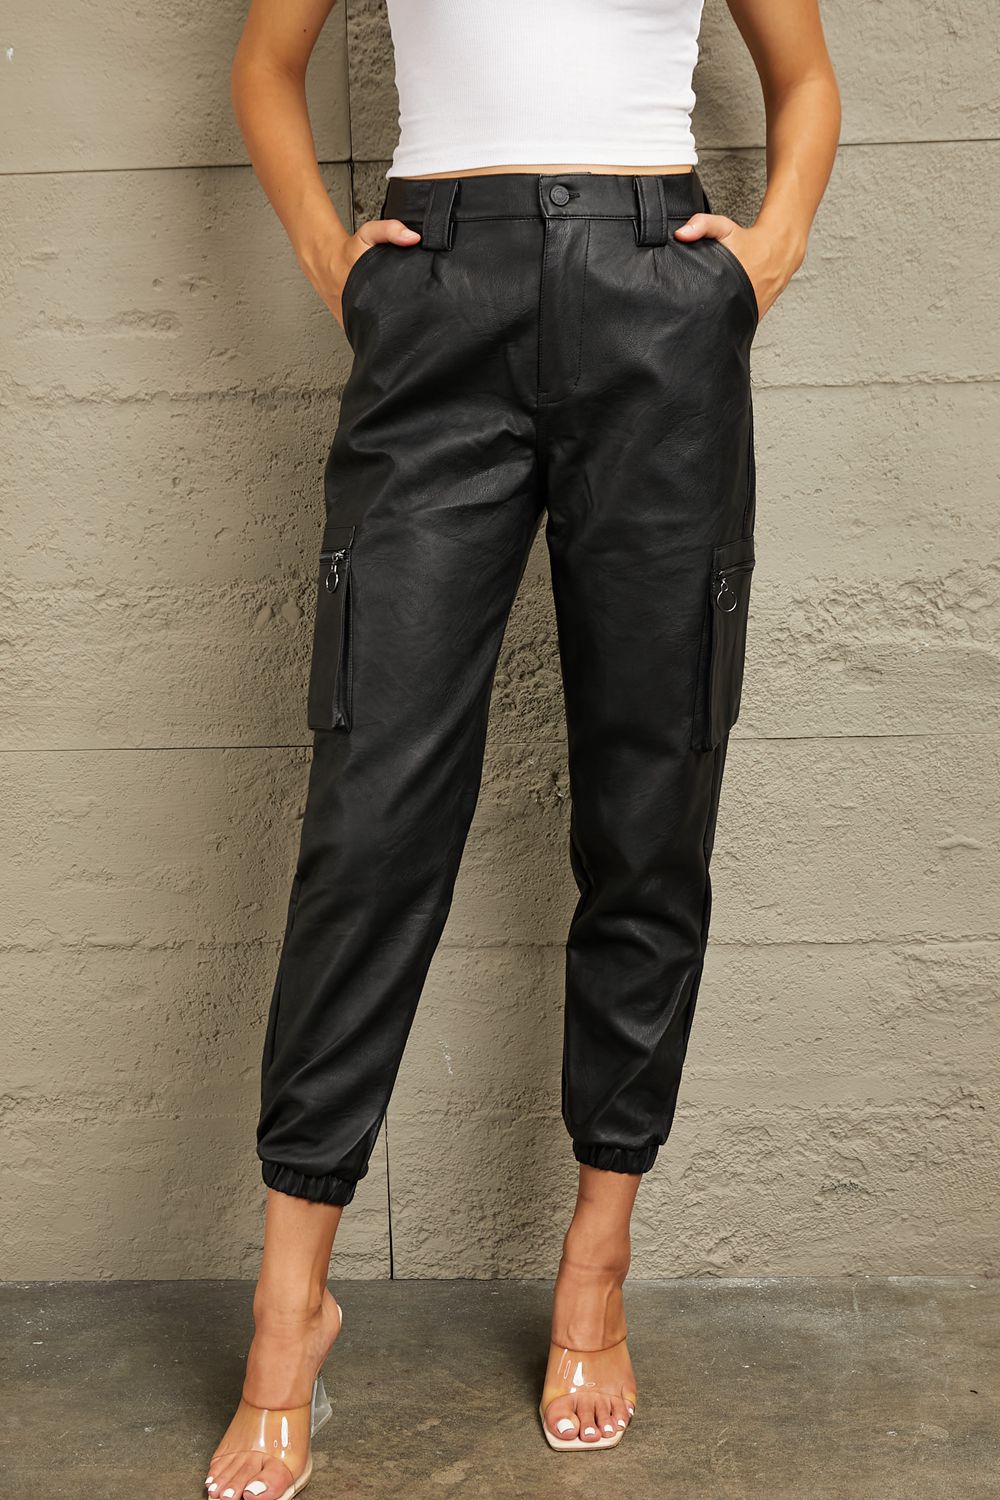 Kancan High Rise Leather Joggers - Fashion Girl Online Store